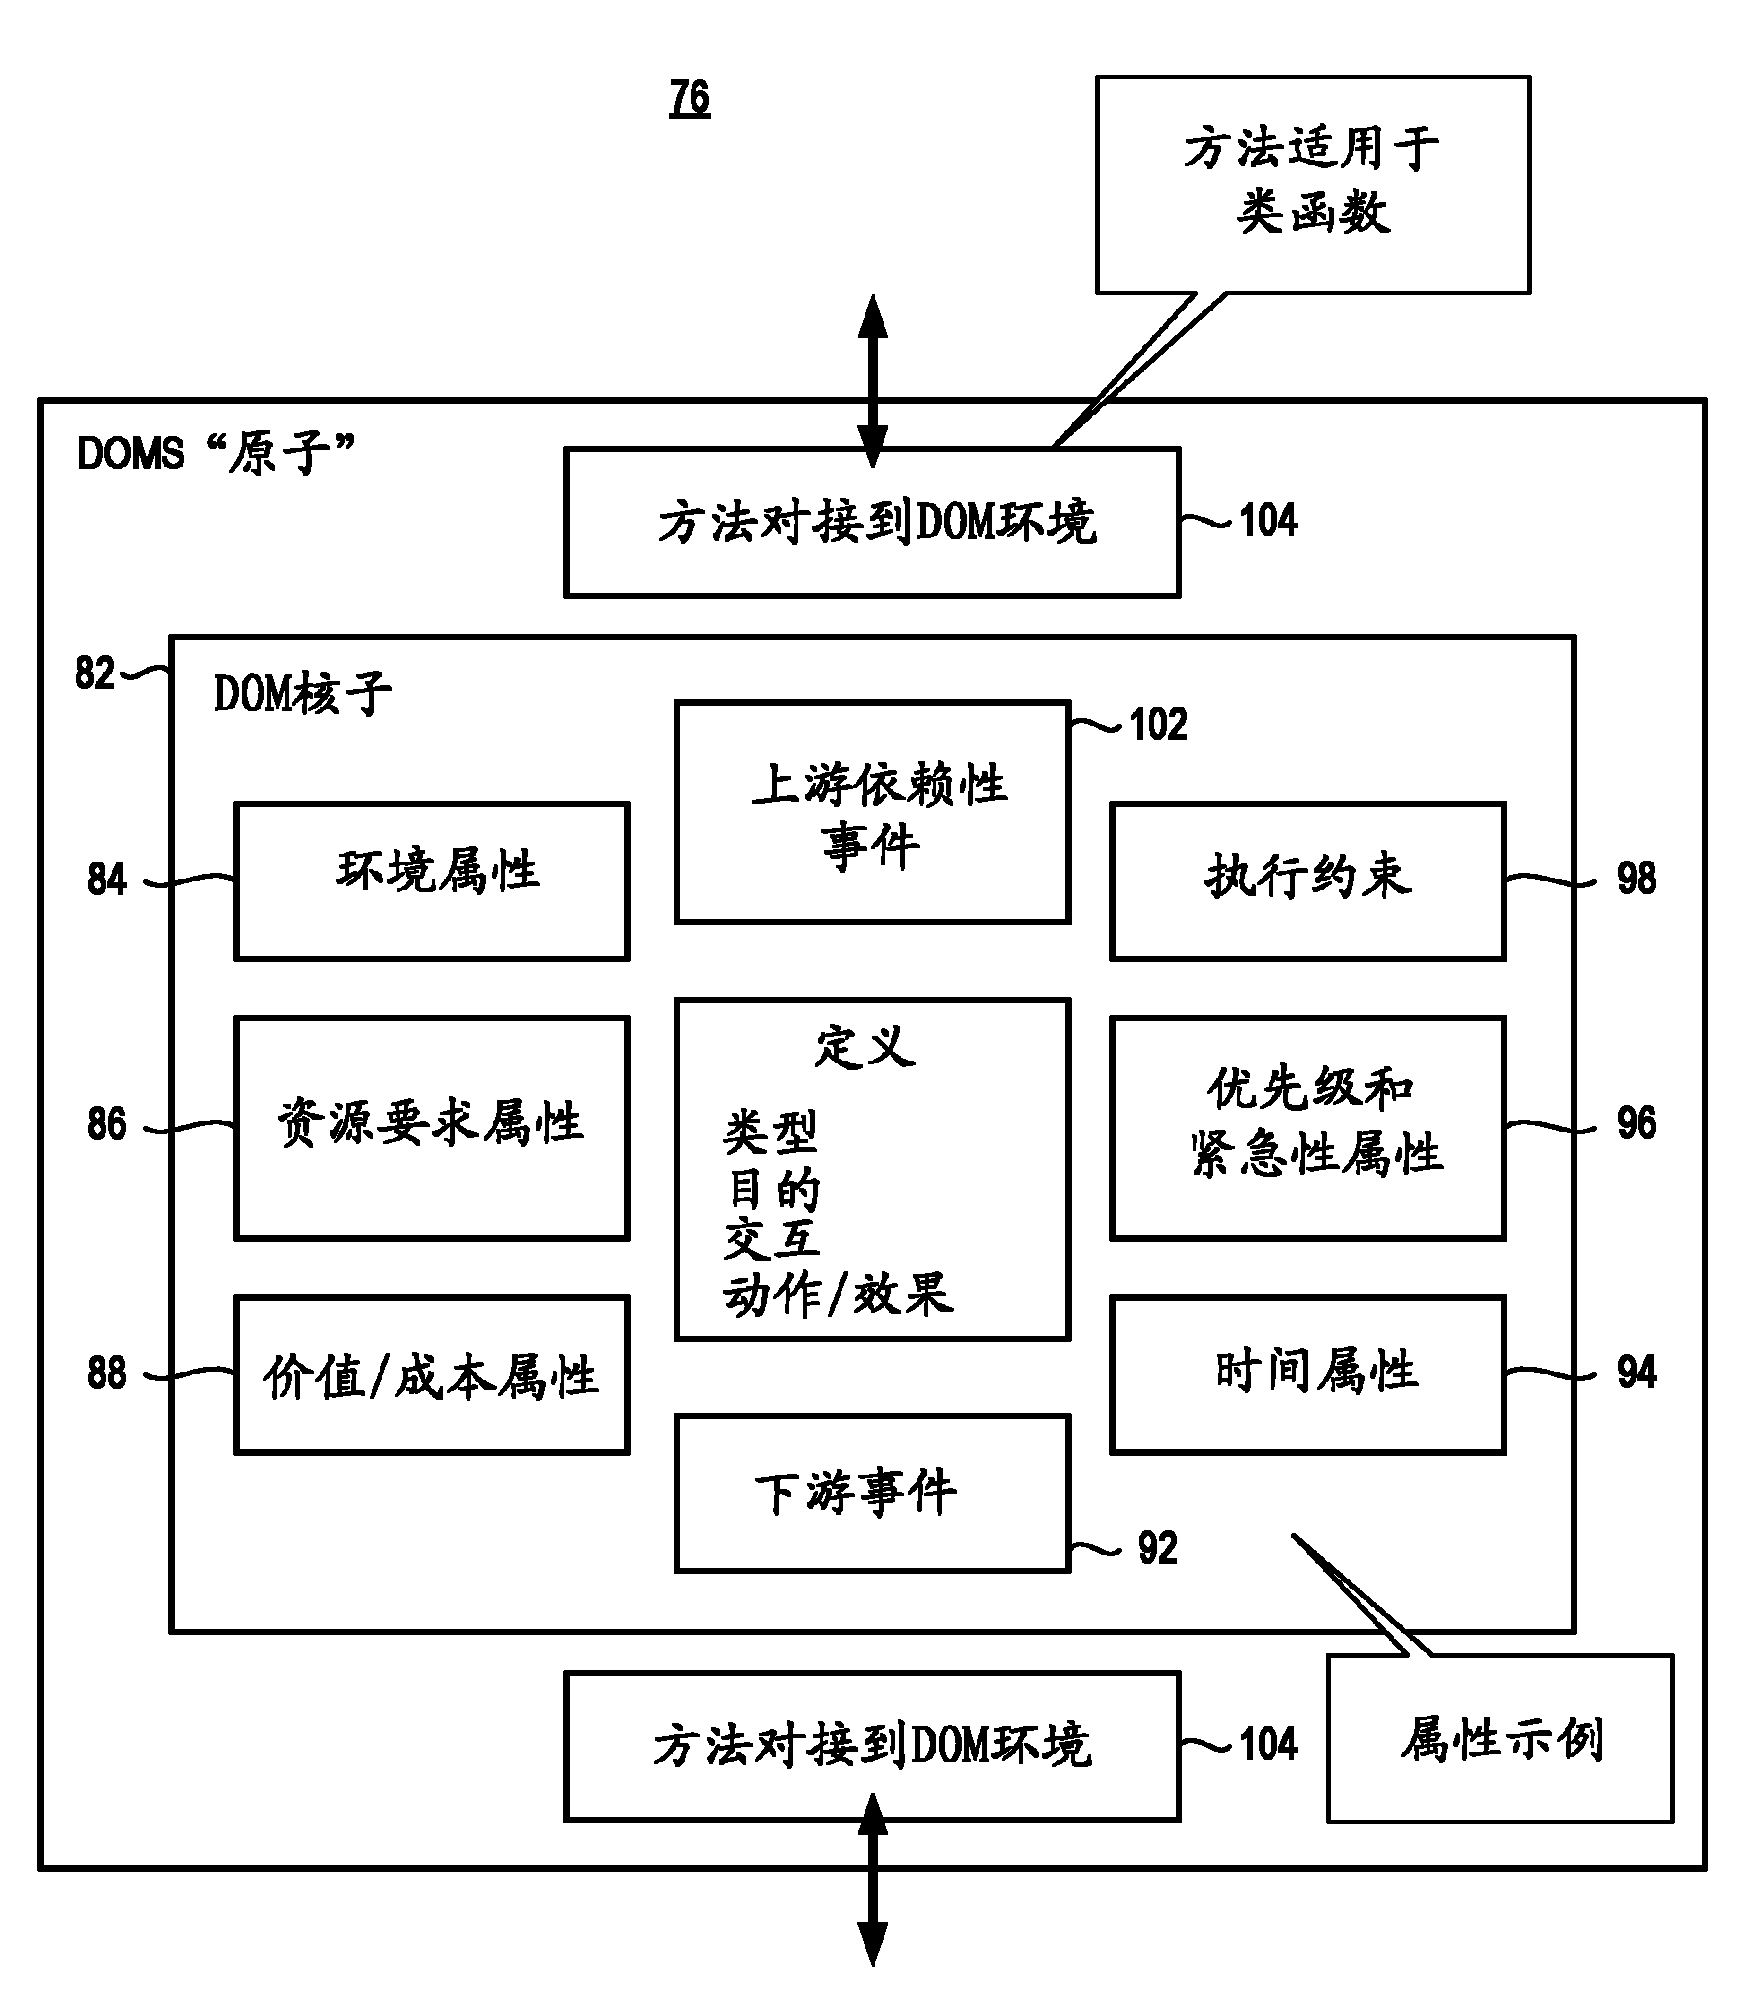 Deployment overview management system, apparatus, and method